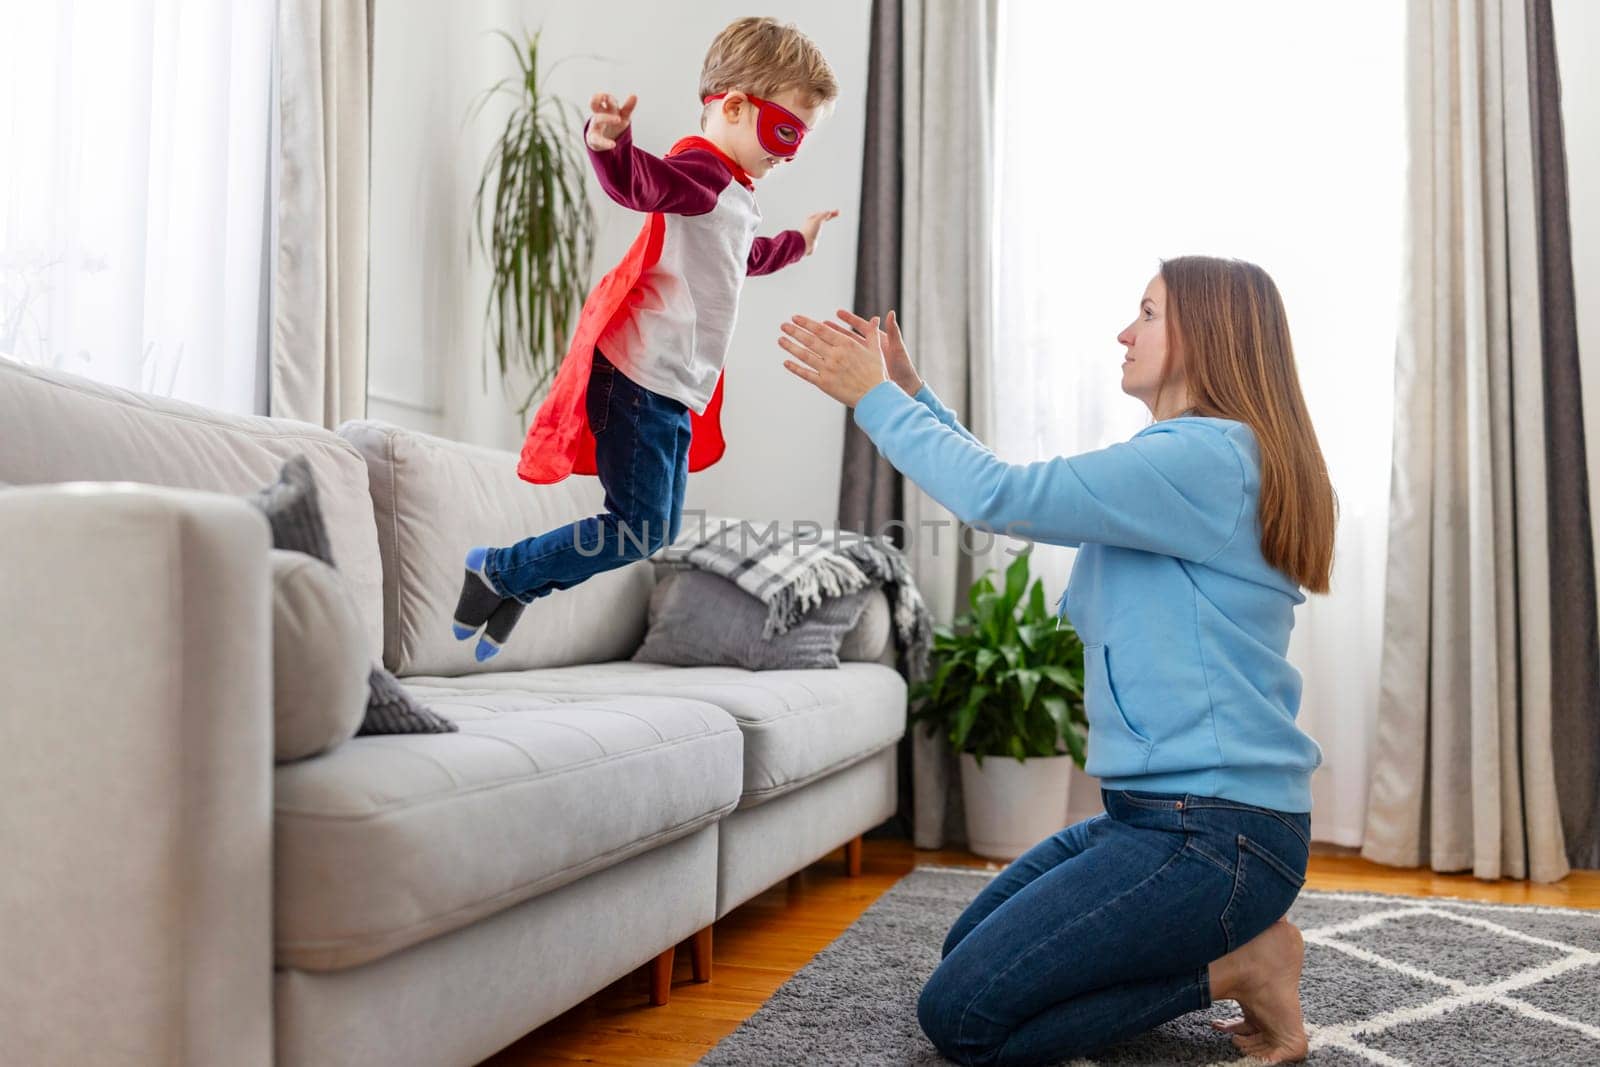 Joyful playtime between a mother and her child pretending to fly like a superhero in a living room.